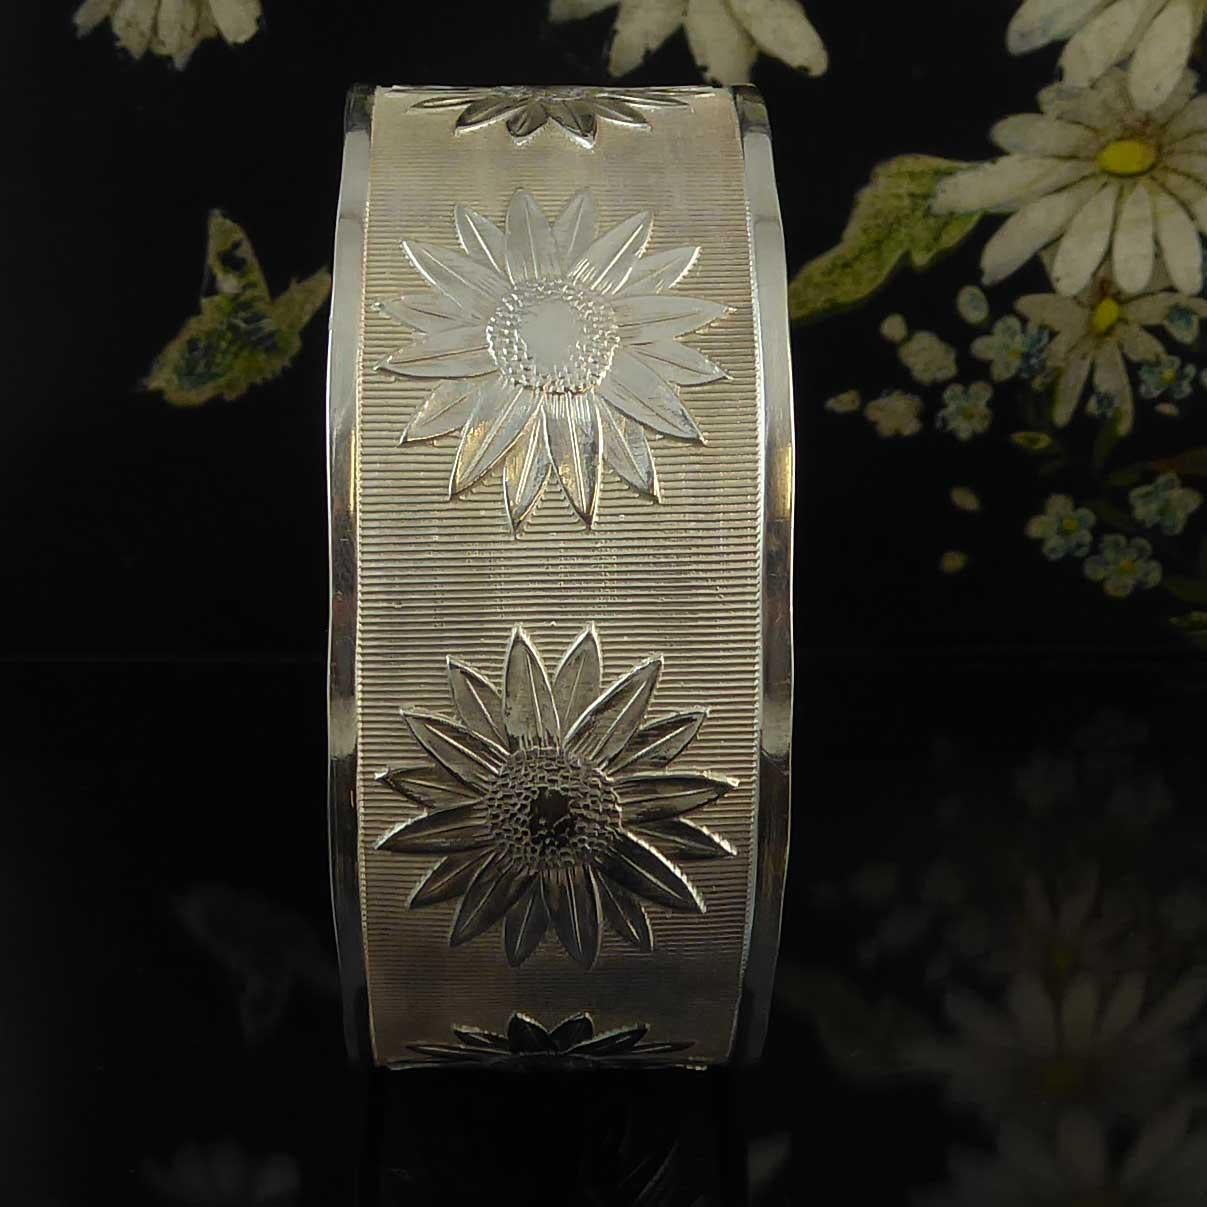 Vintage silver bangle hallmarked at the Chester Assay Office in 1945.  The bangle is adorned with eight daisies against a reeded pattern backround with plain polished edges. Fastening with a buckle style fastener enabling the bangle to be adjusted